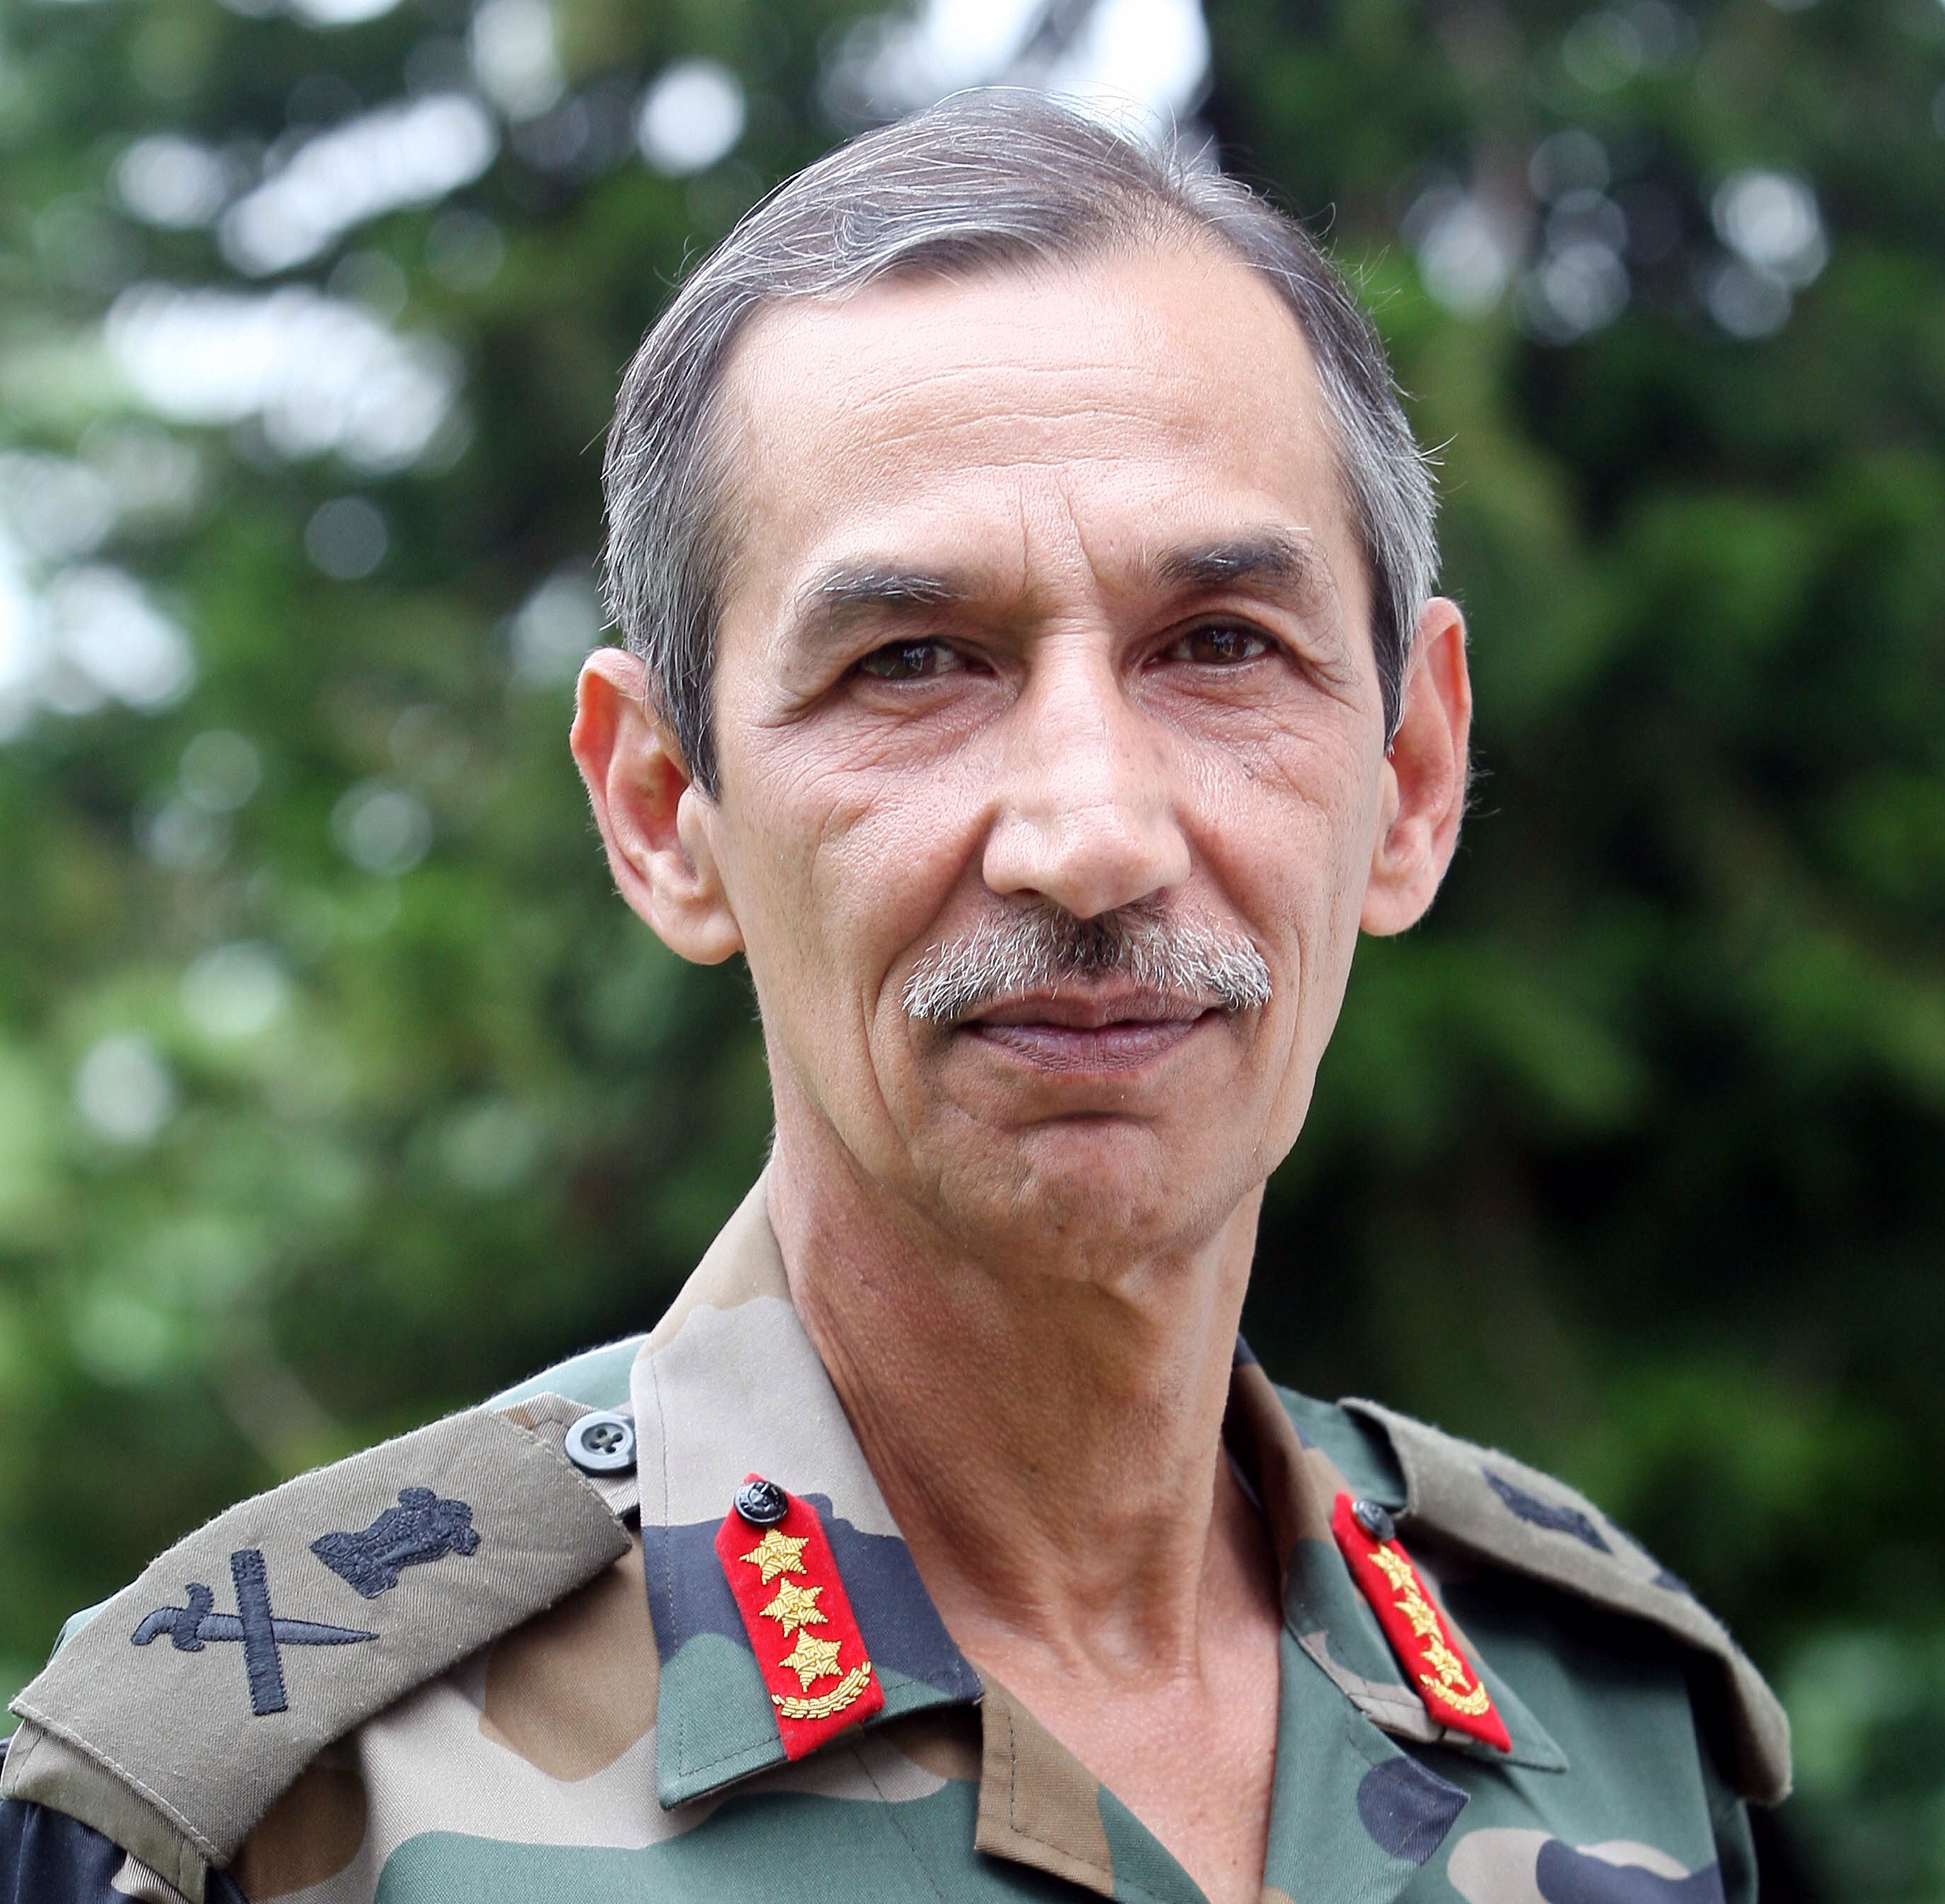 Surgical strikes took place before Modi government too, says Lt Gen Hooda